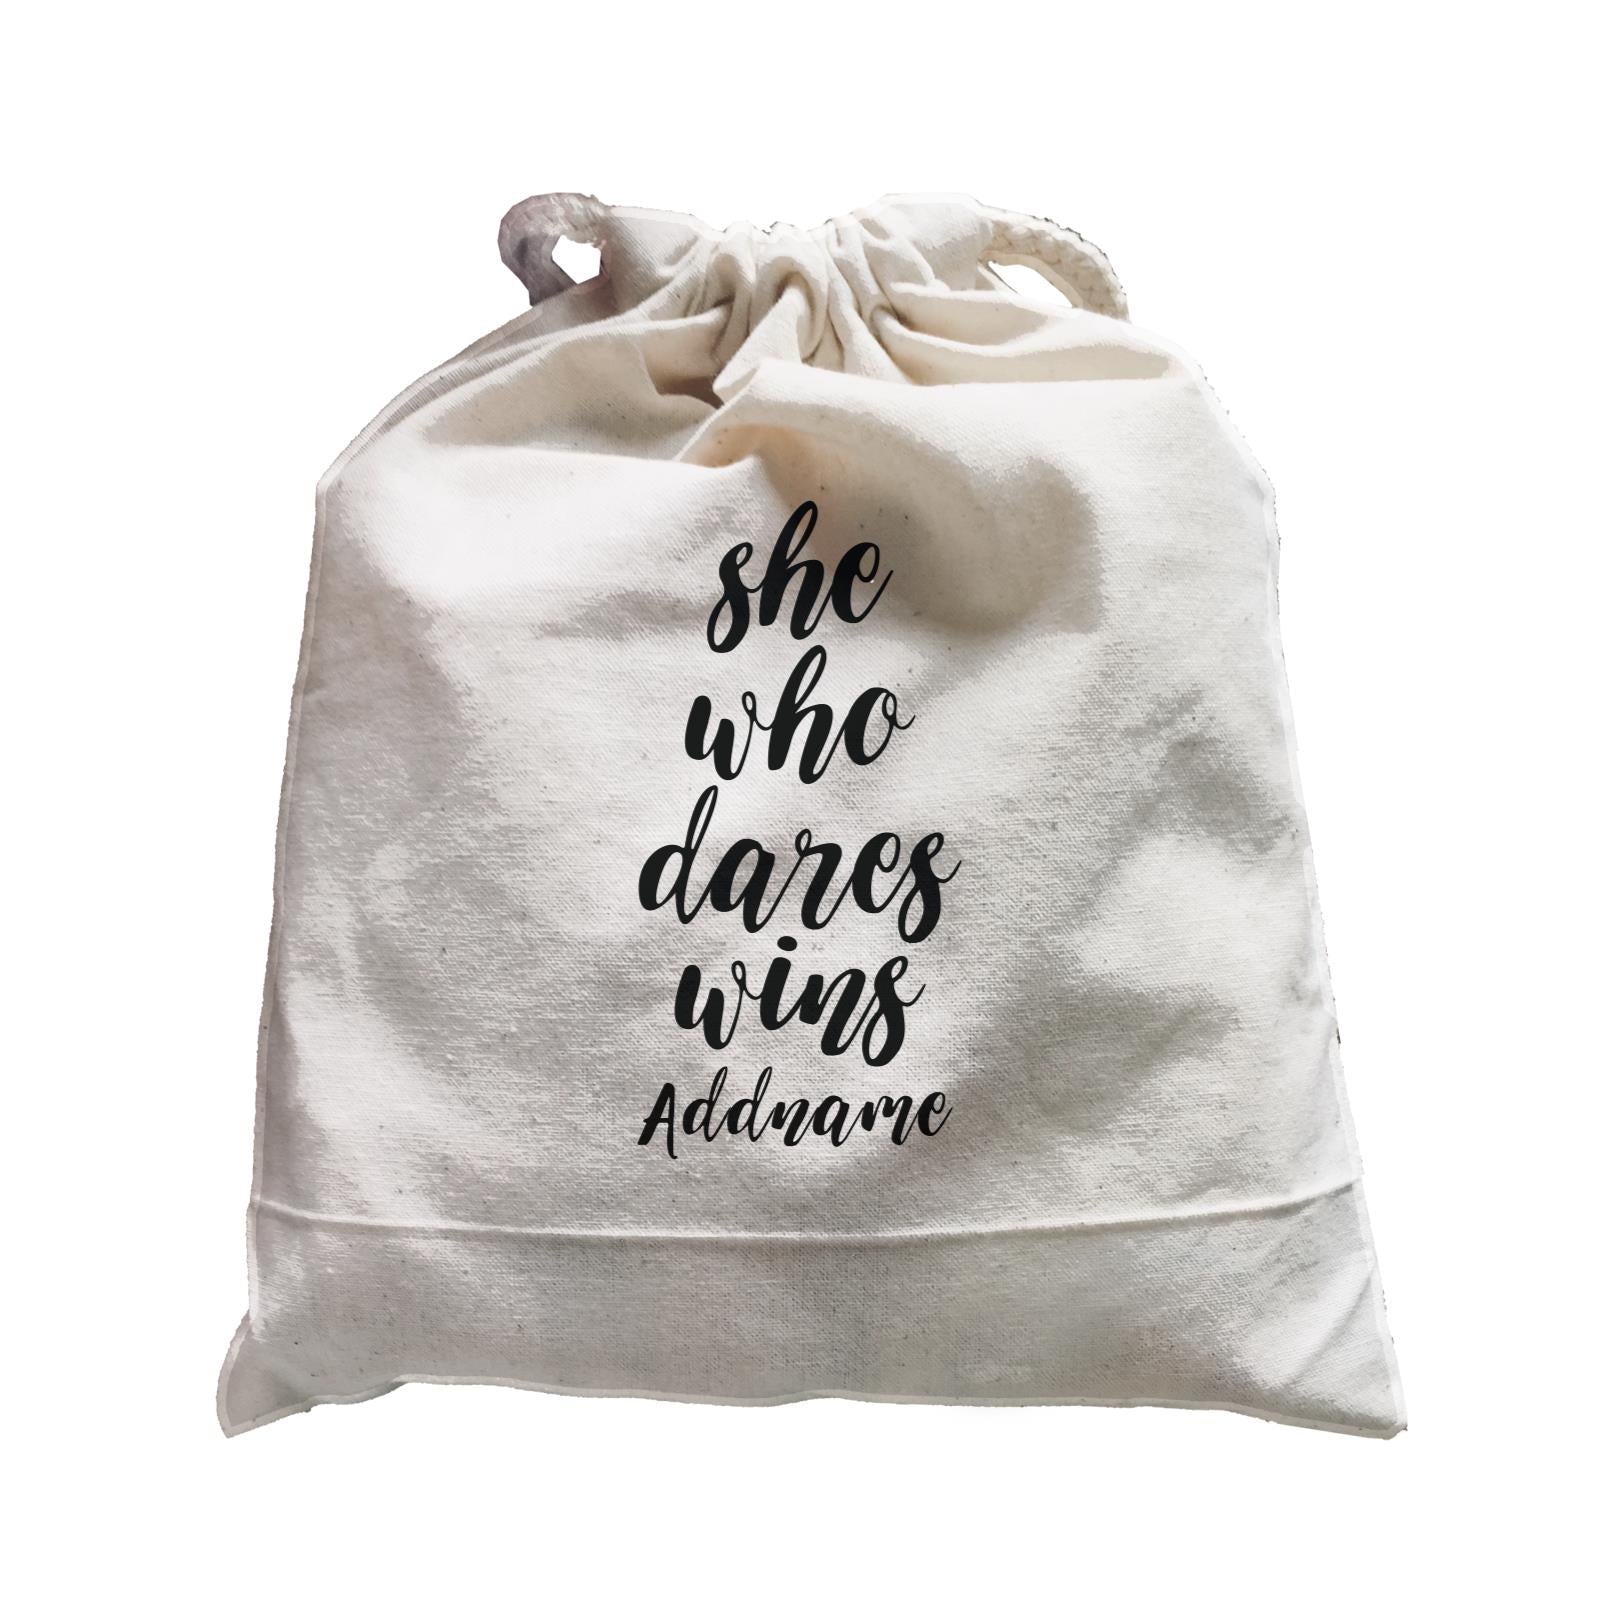 Girl Boss Quotes She Who Dares Wins Addname Satchel